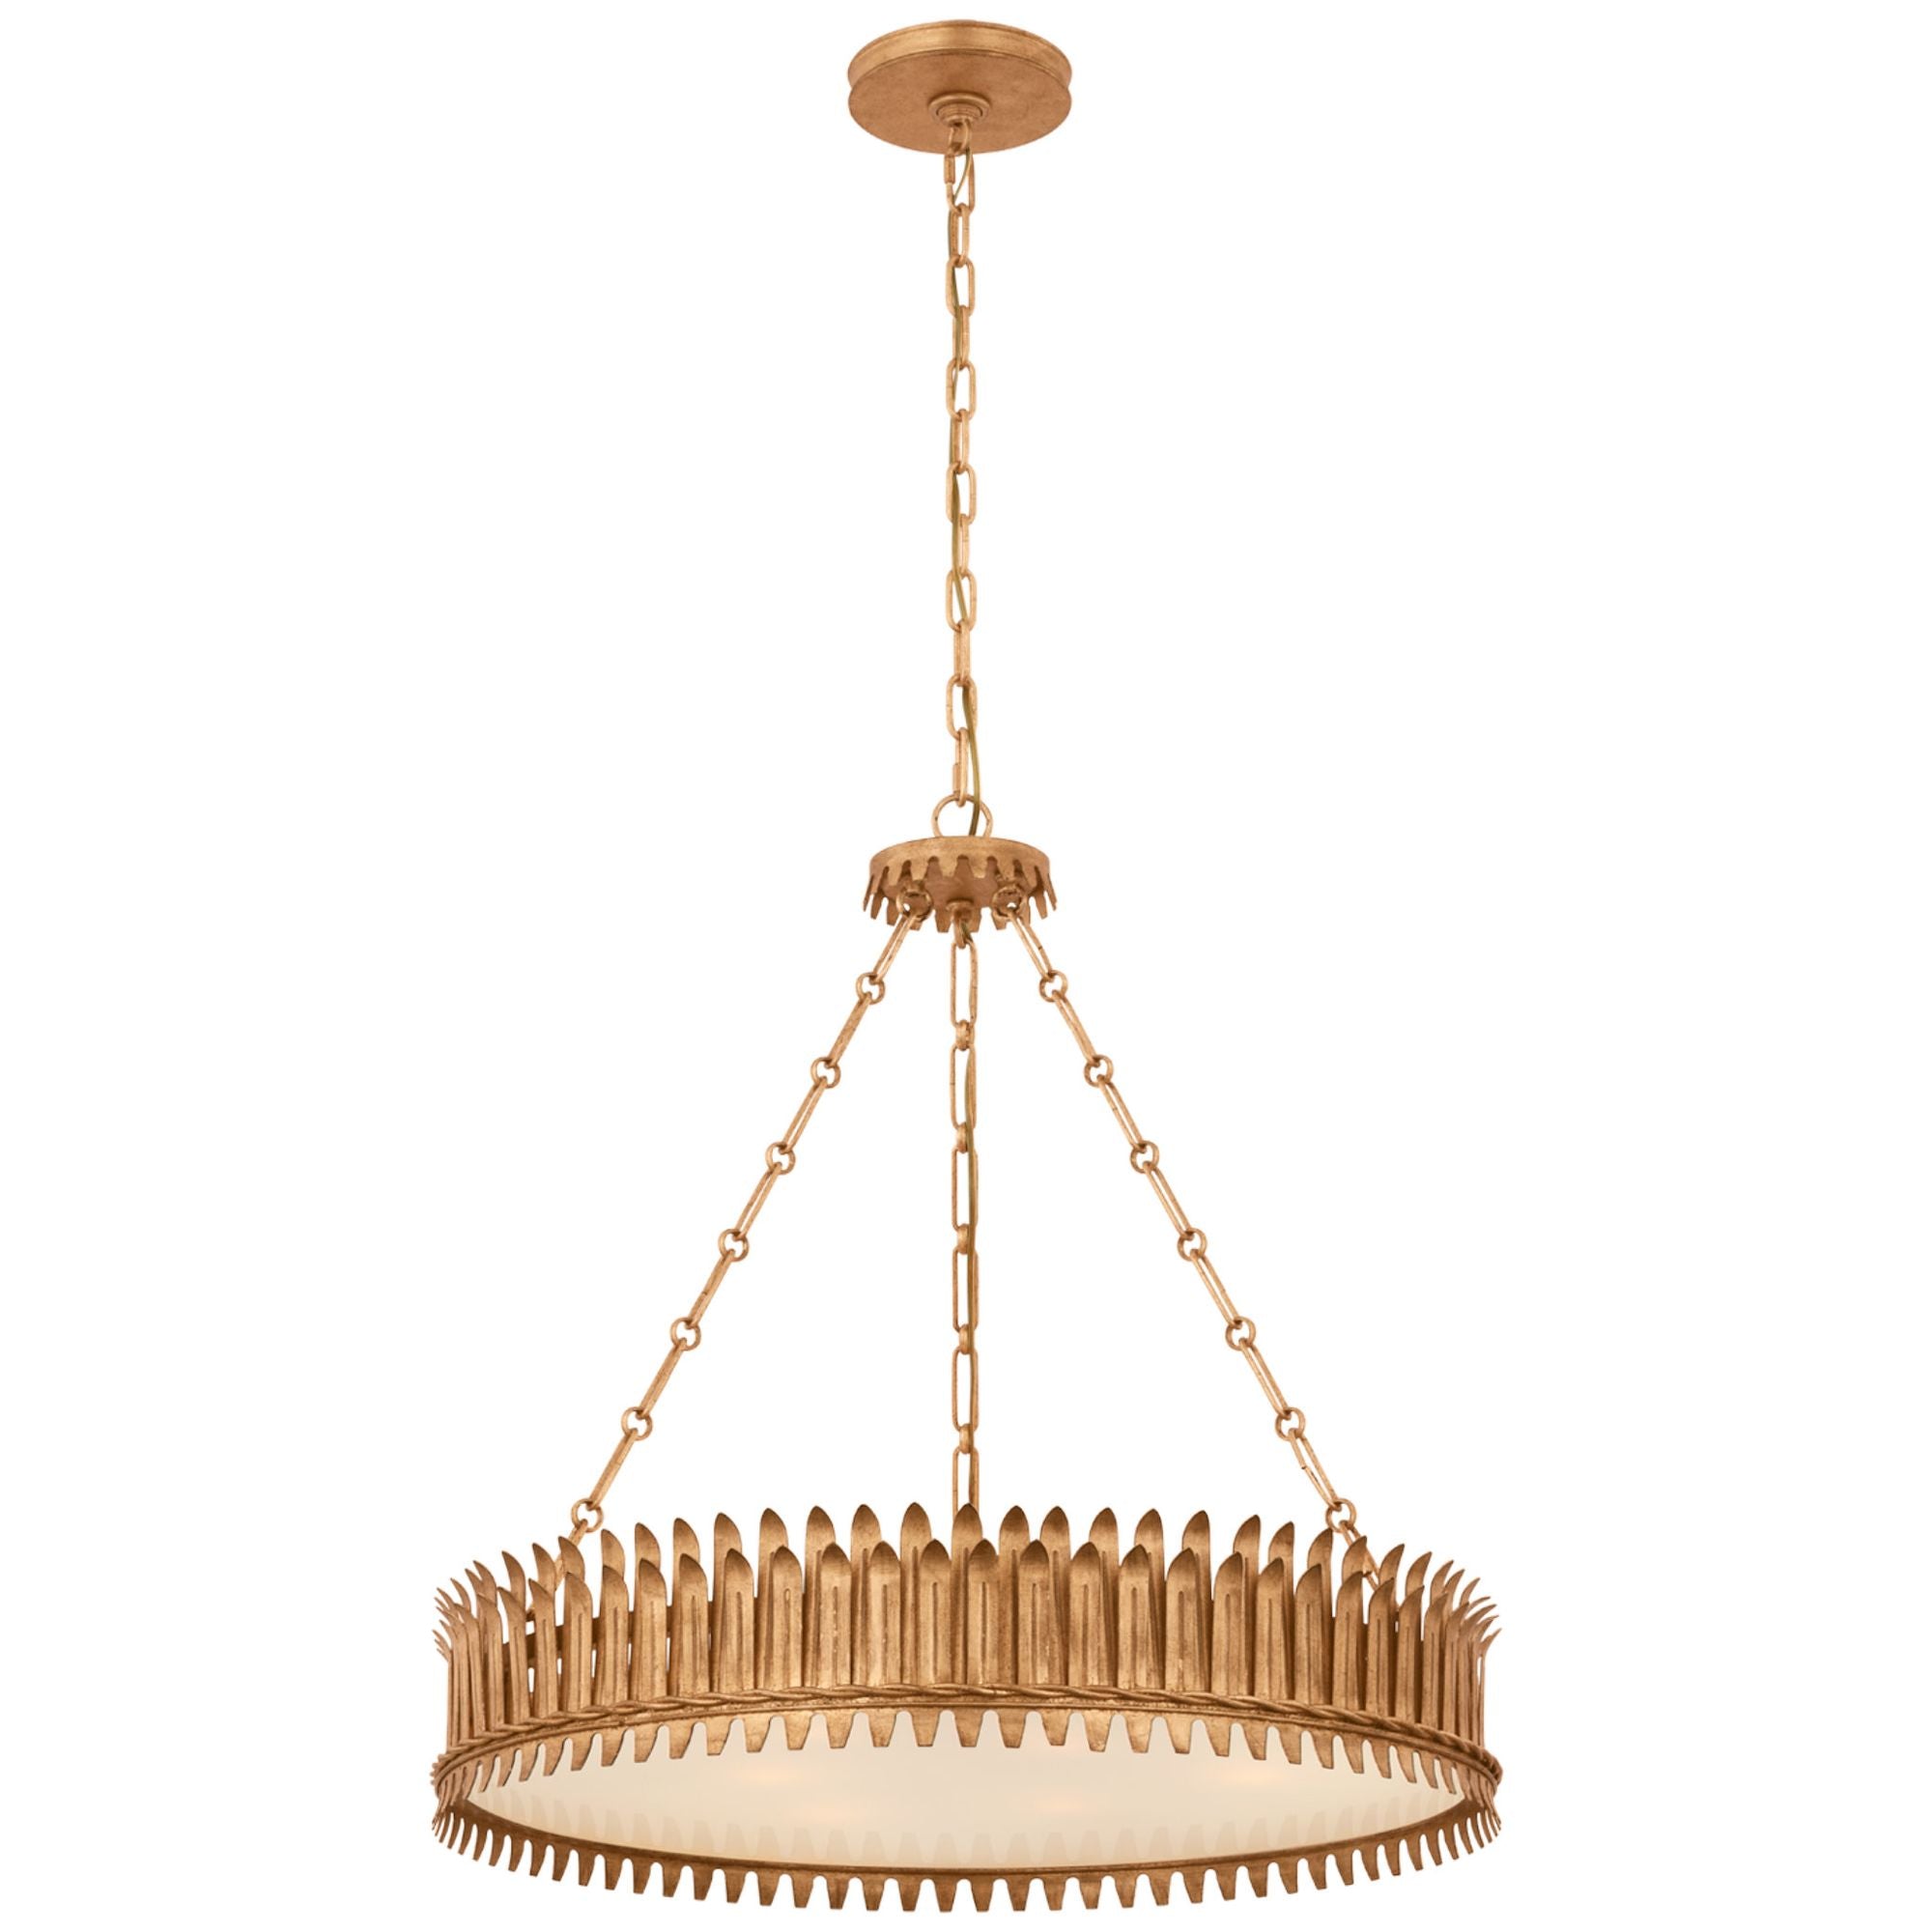 Suzanne Kasler Leslie 27" Chandelier in Gilded Iron with Frosted Acrylic